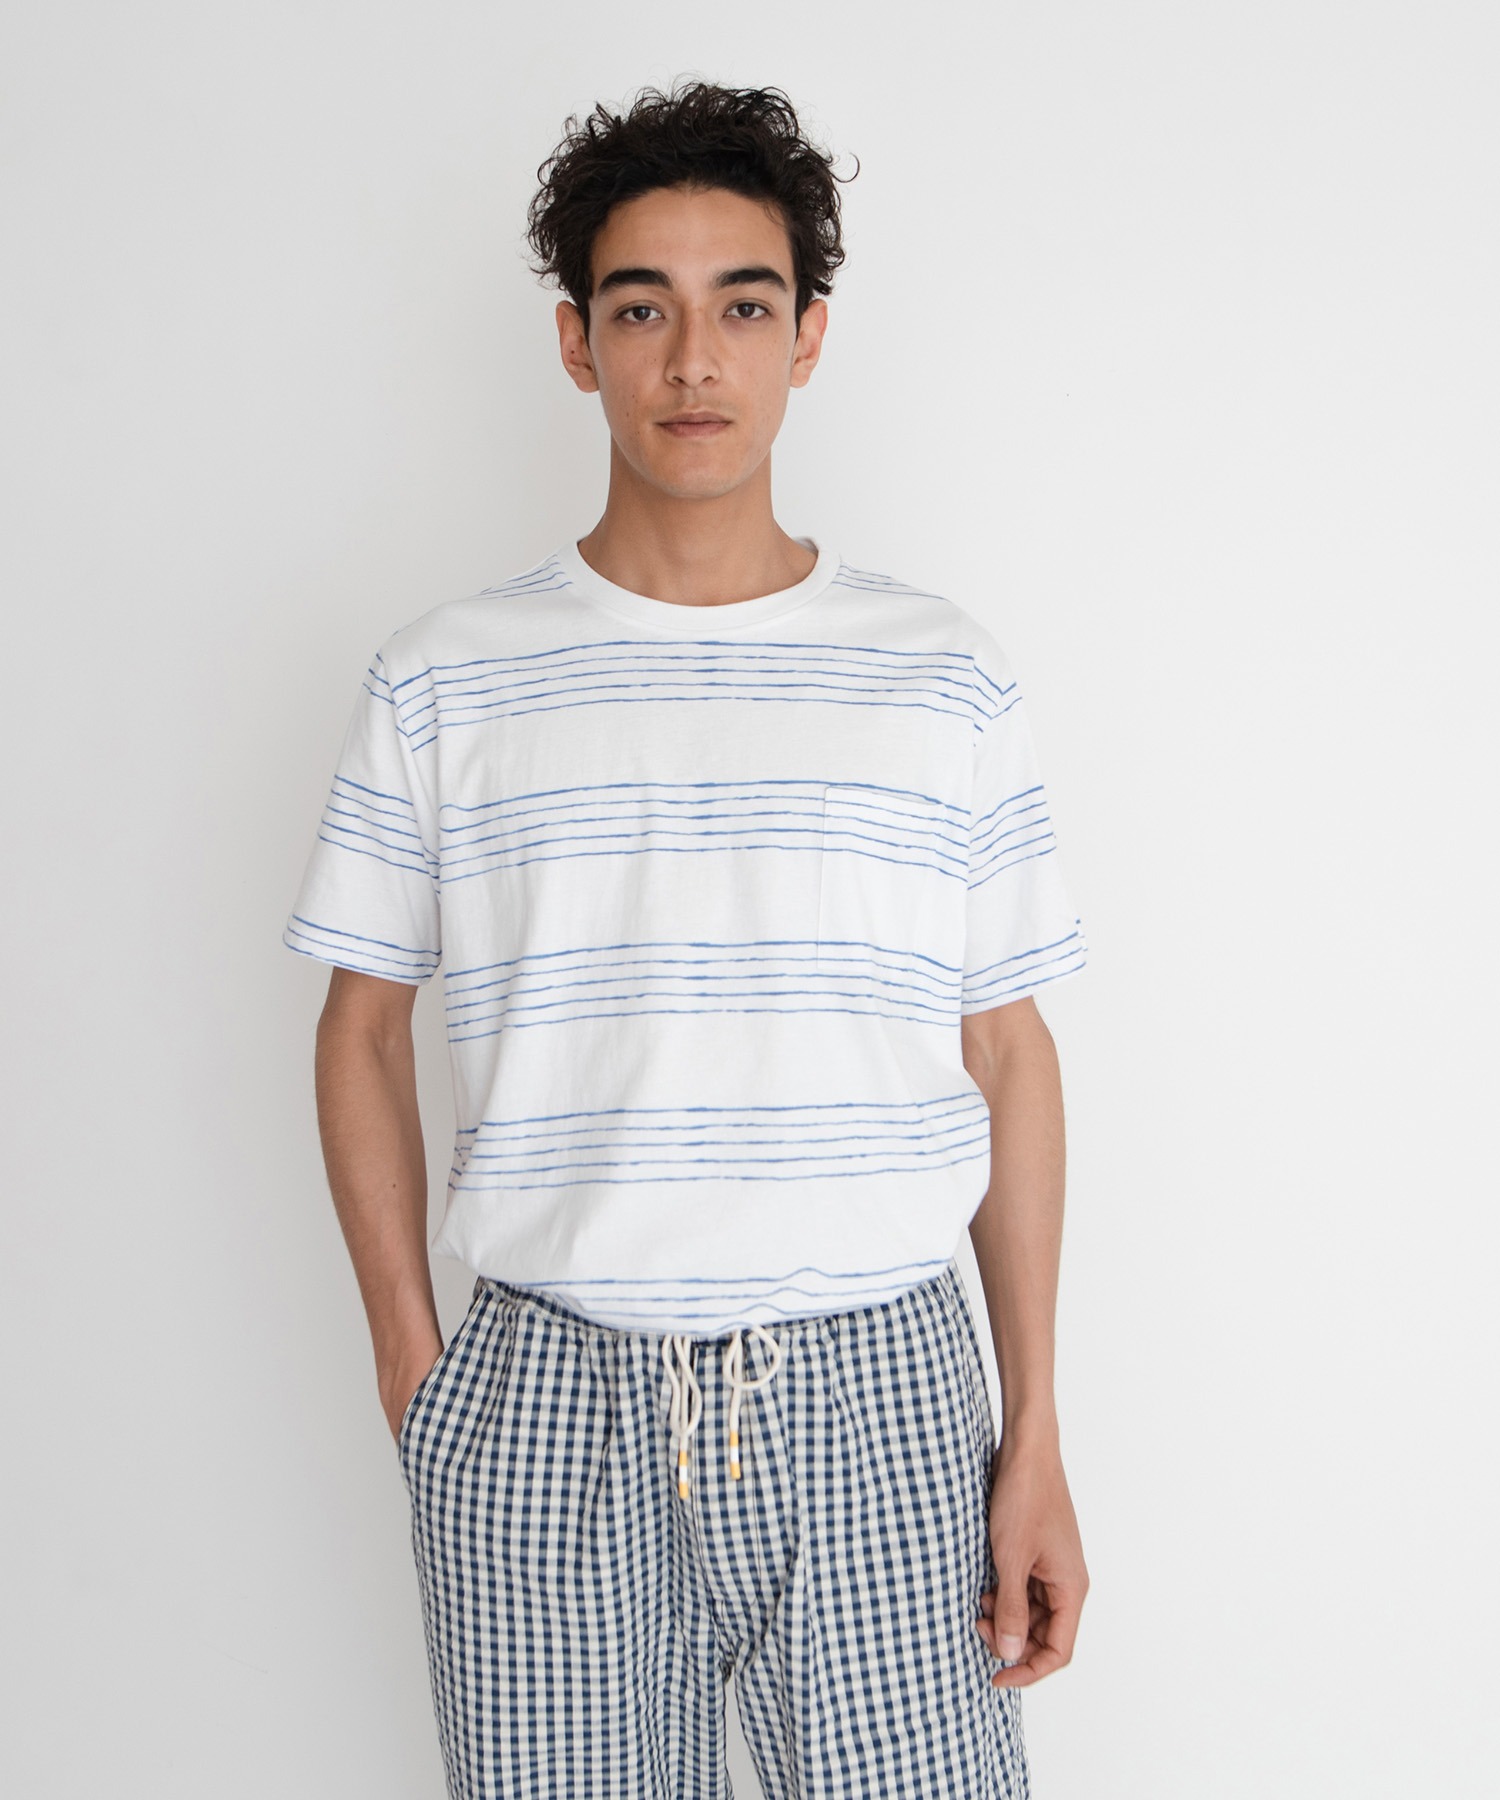 Levi'sLEVI'S R MADECRAFTED ポケットT GOLDIE MULTI 日本最大級 STRIPE SALE 74%OFF